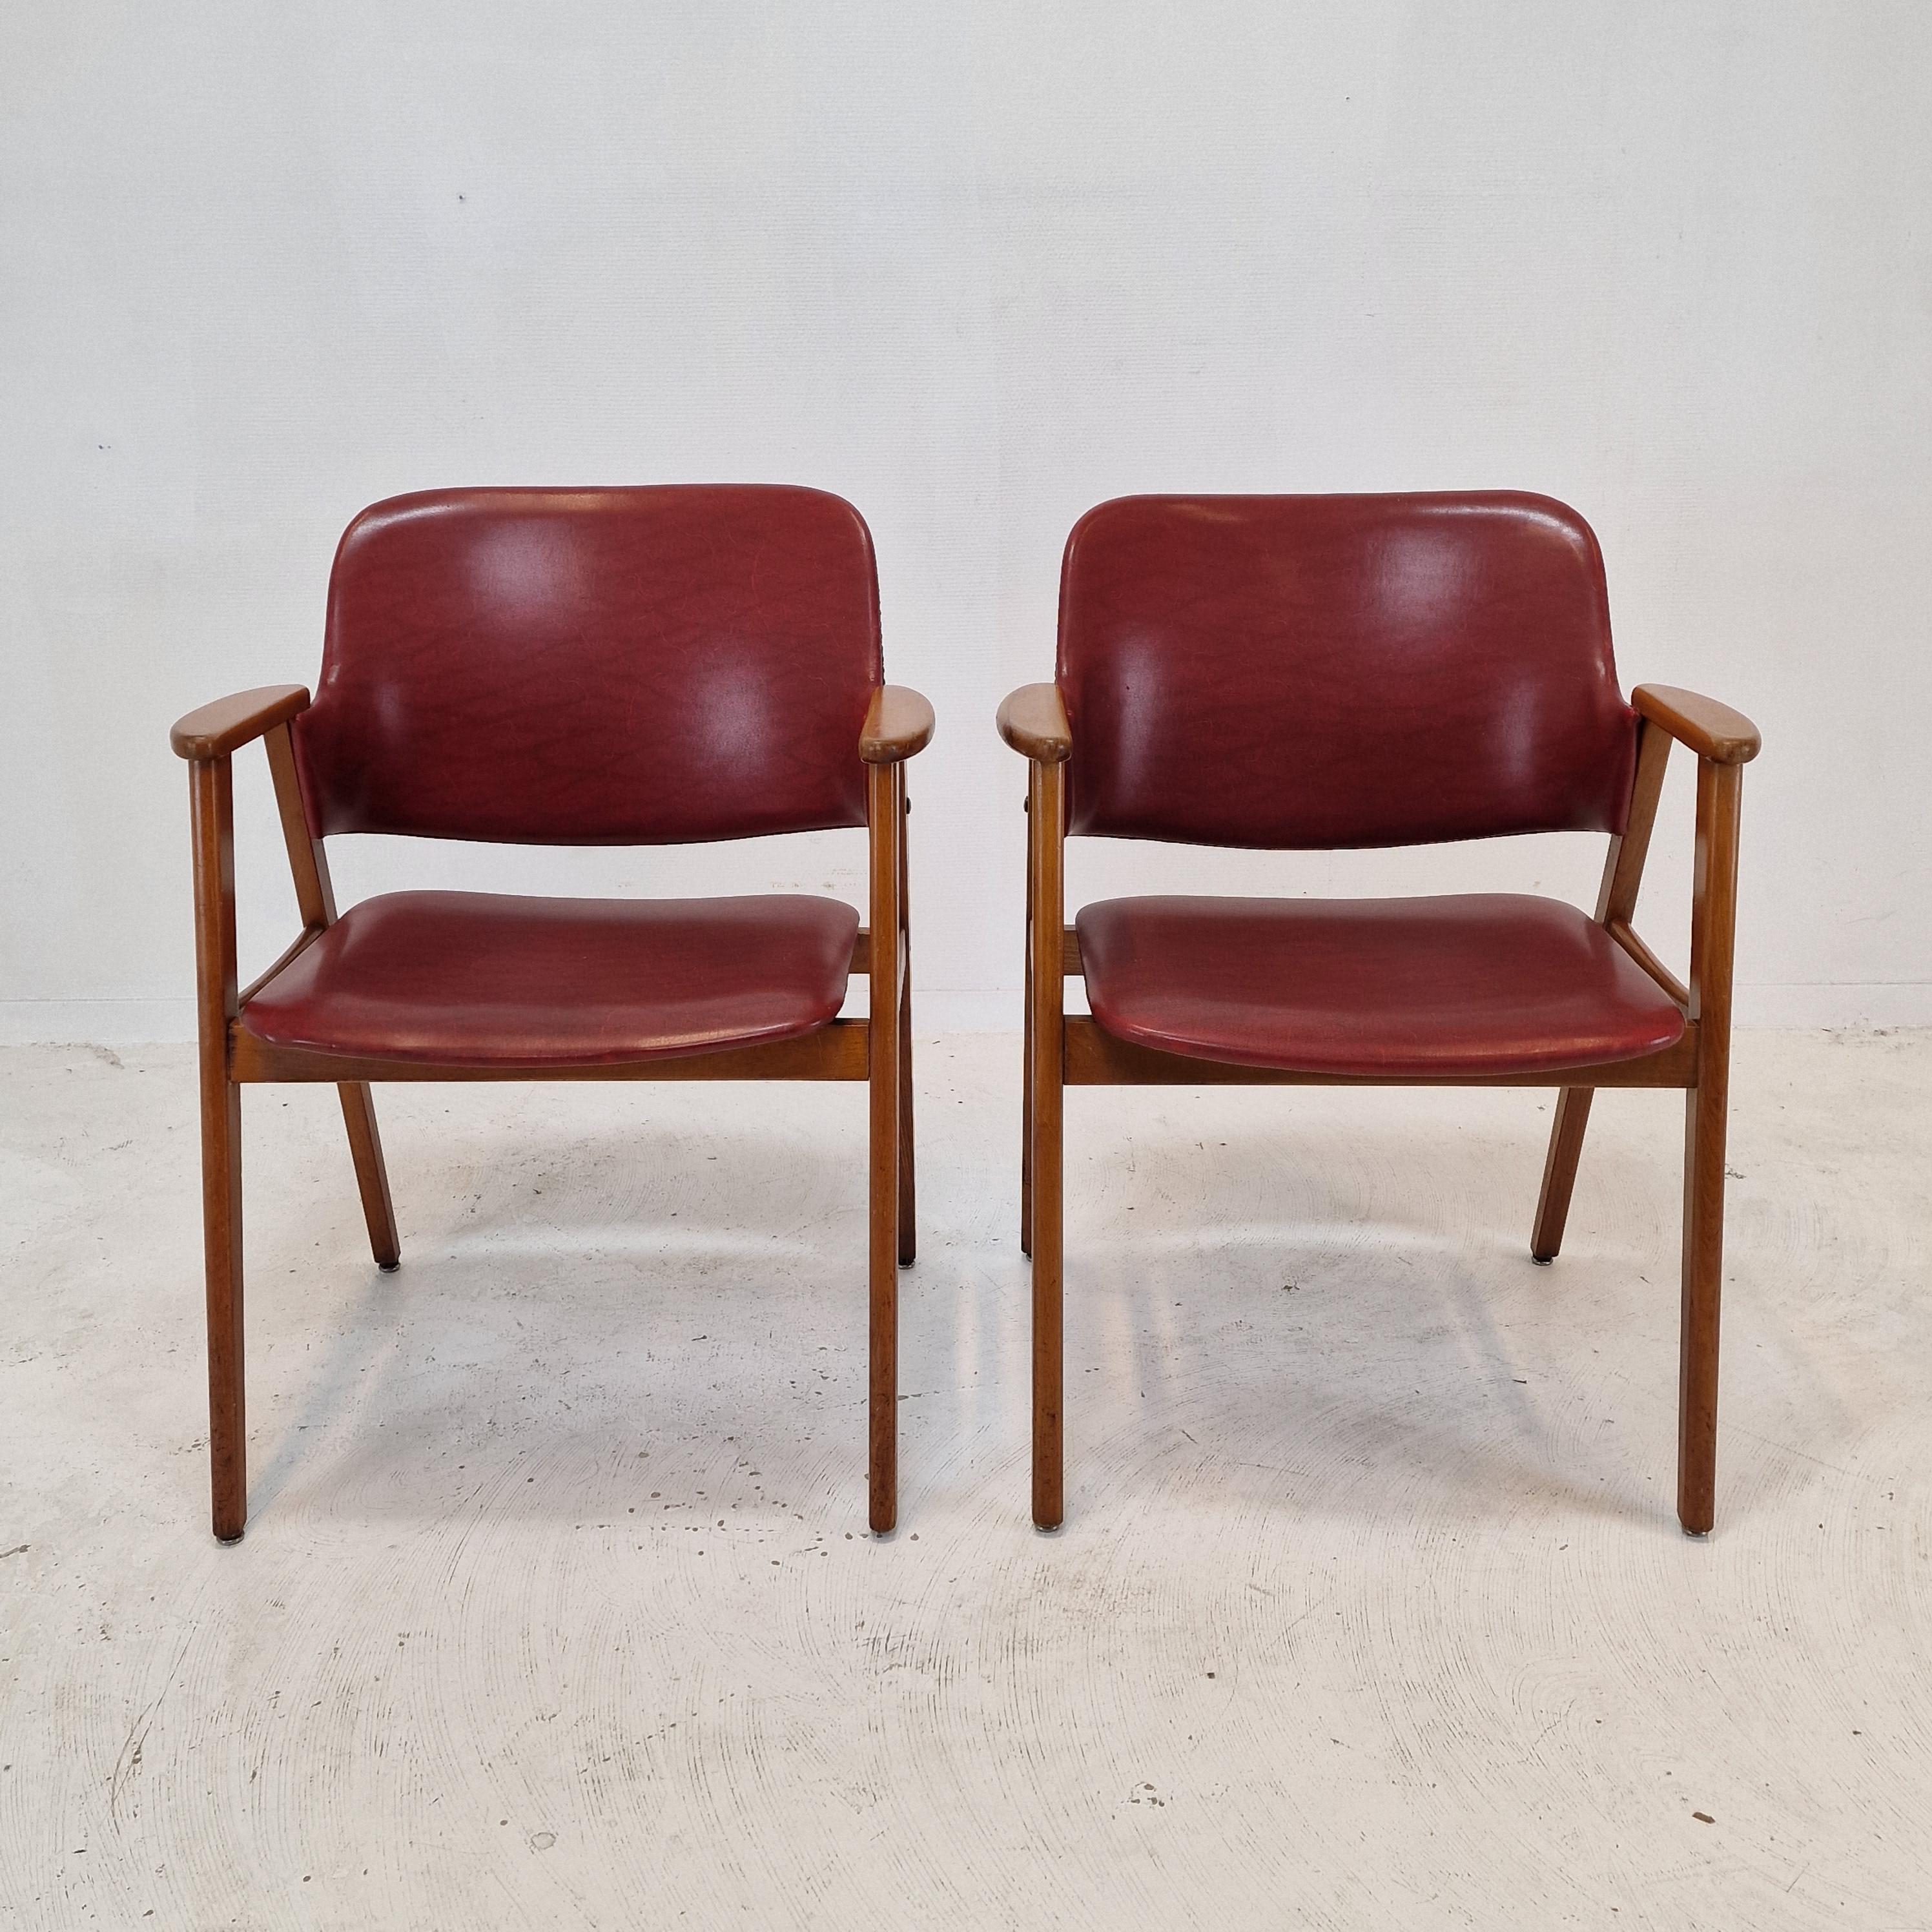 This very comfortable mid-century chair is designed by Cees Braakman.
It is manufactured during the 50's by UMS Pastoe in the Netherlands. 
They can be used as dining chairs or side chairs.

The legs and the armrests are made from wood.
The